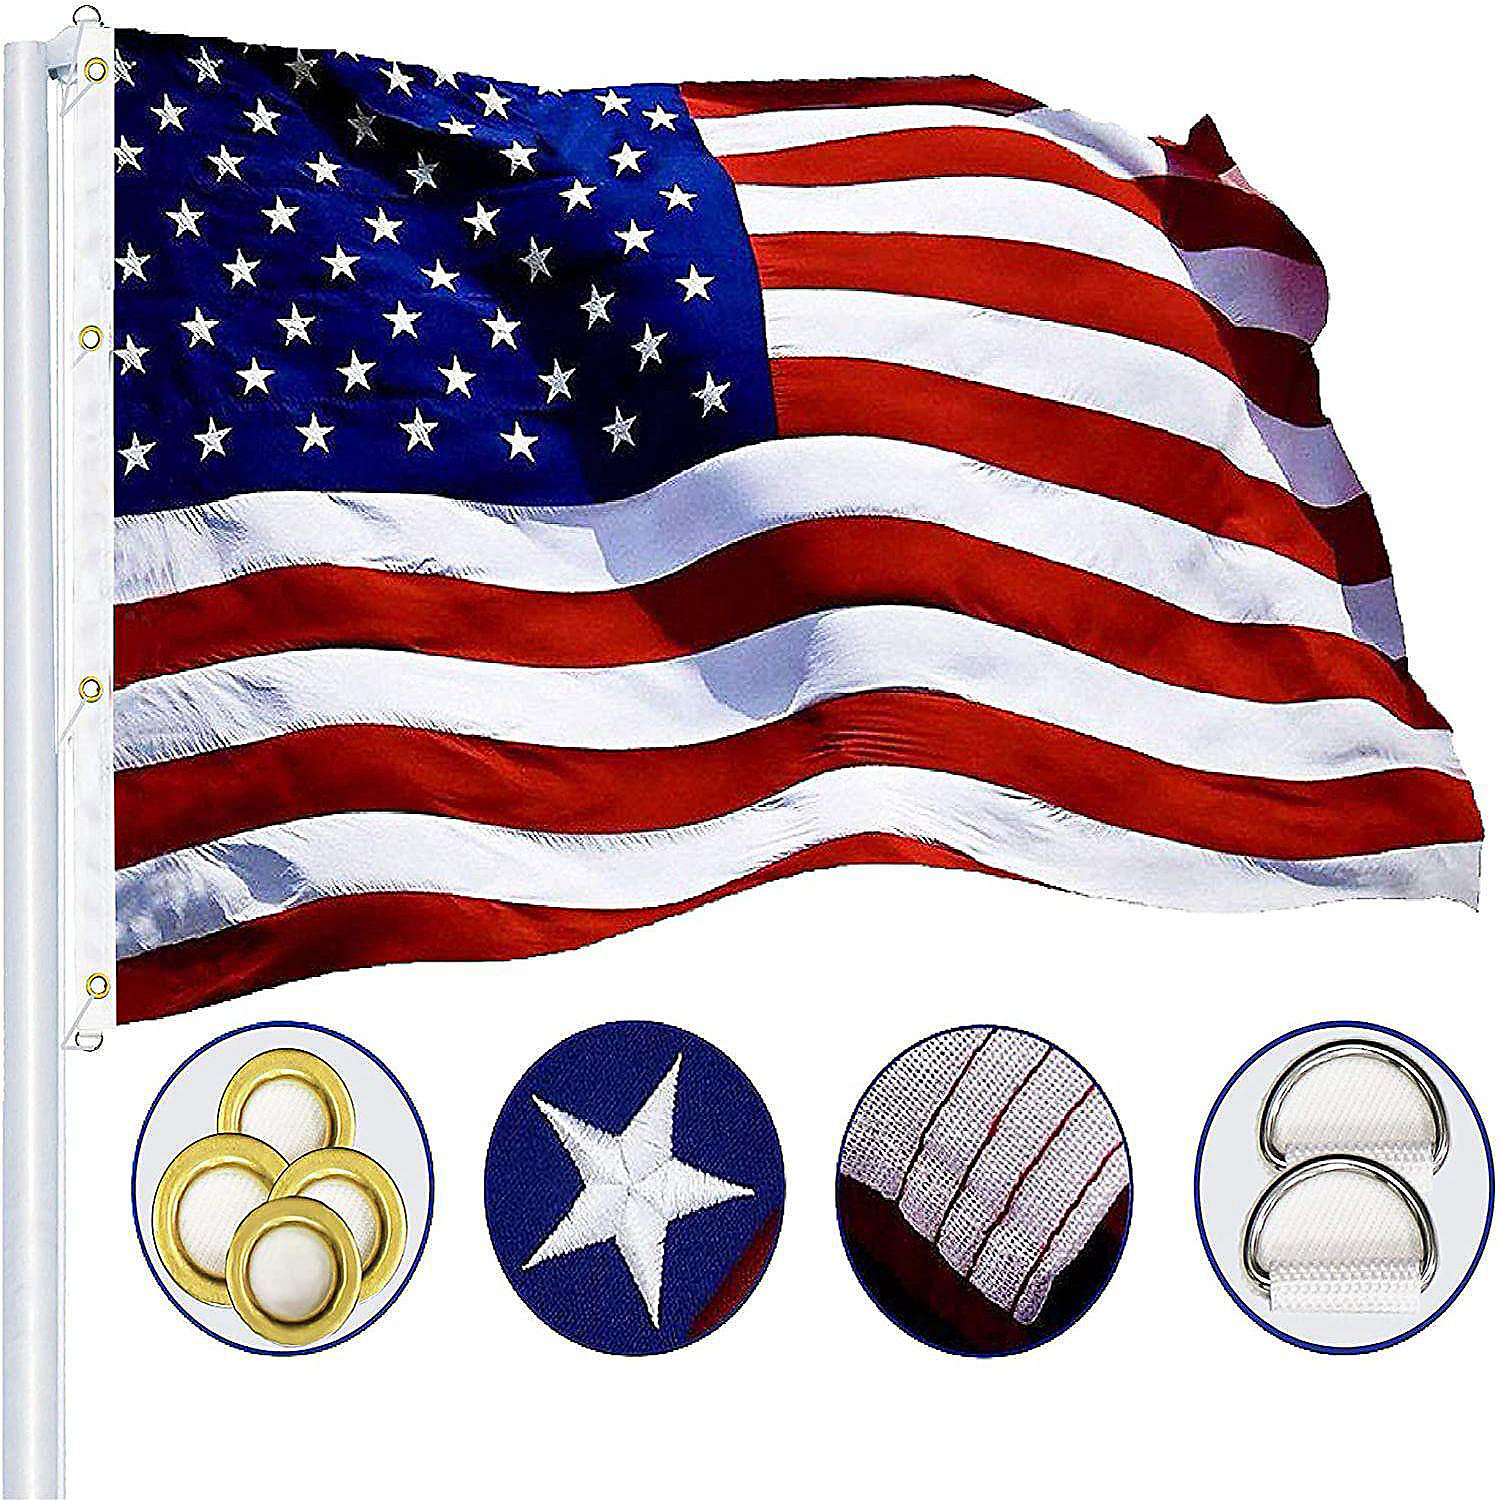 Embroider Stars Heavyweight US Outdoor Indoor Flags American Flag 3x5 ft 